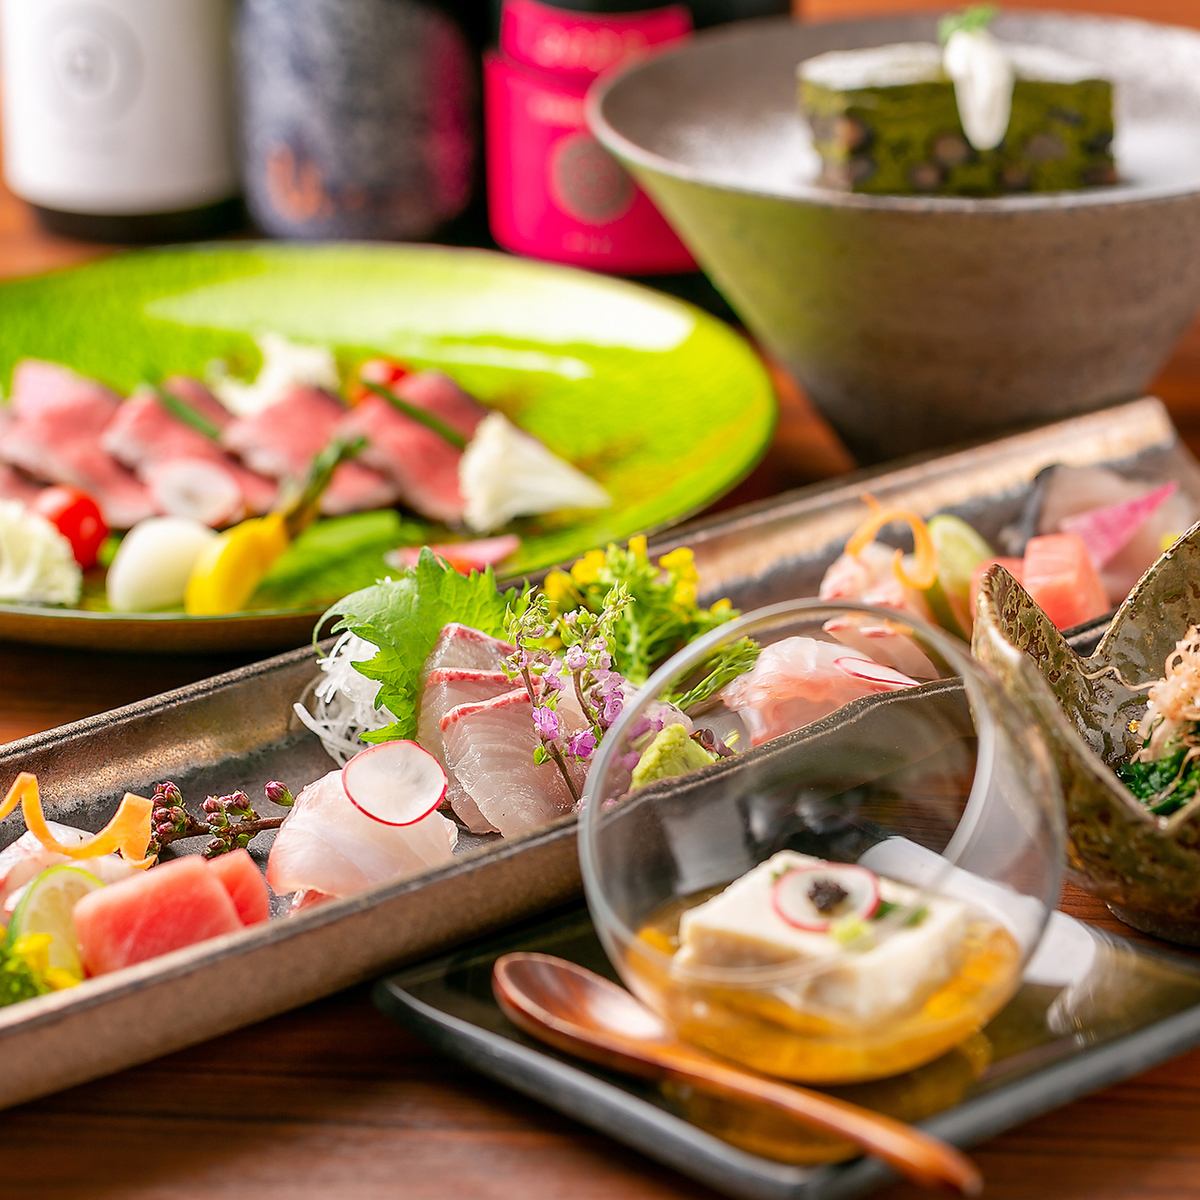 You can enjoy colorful and beautiful Japanese x French creative cuisine to your heart's content in a calm space.